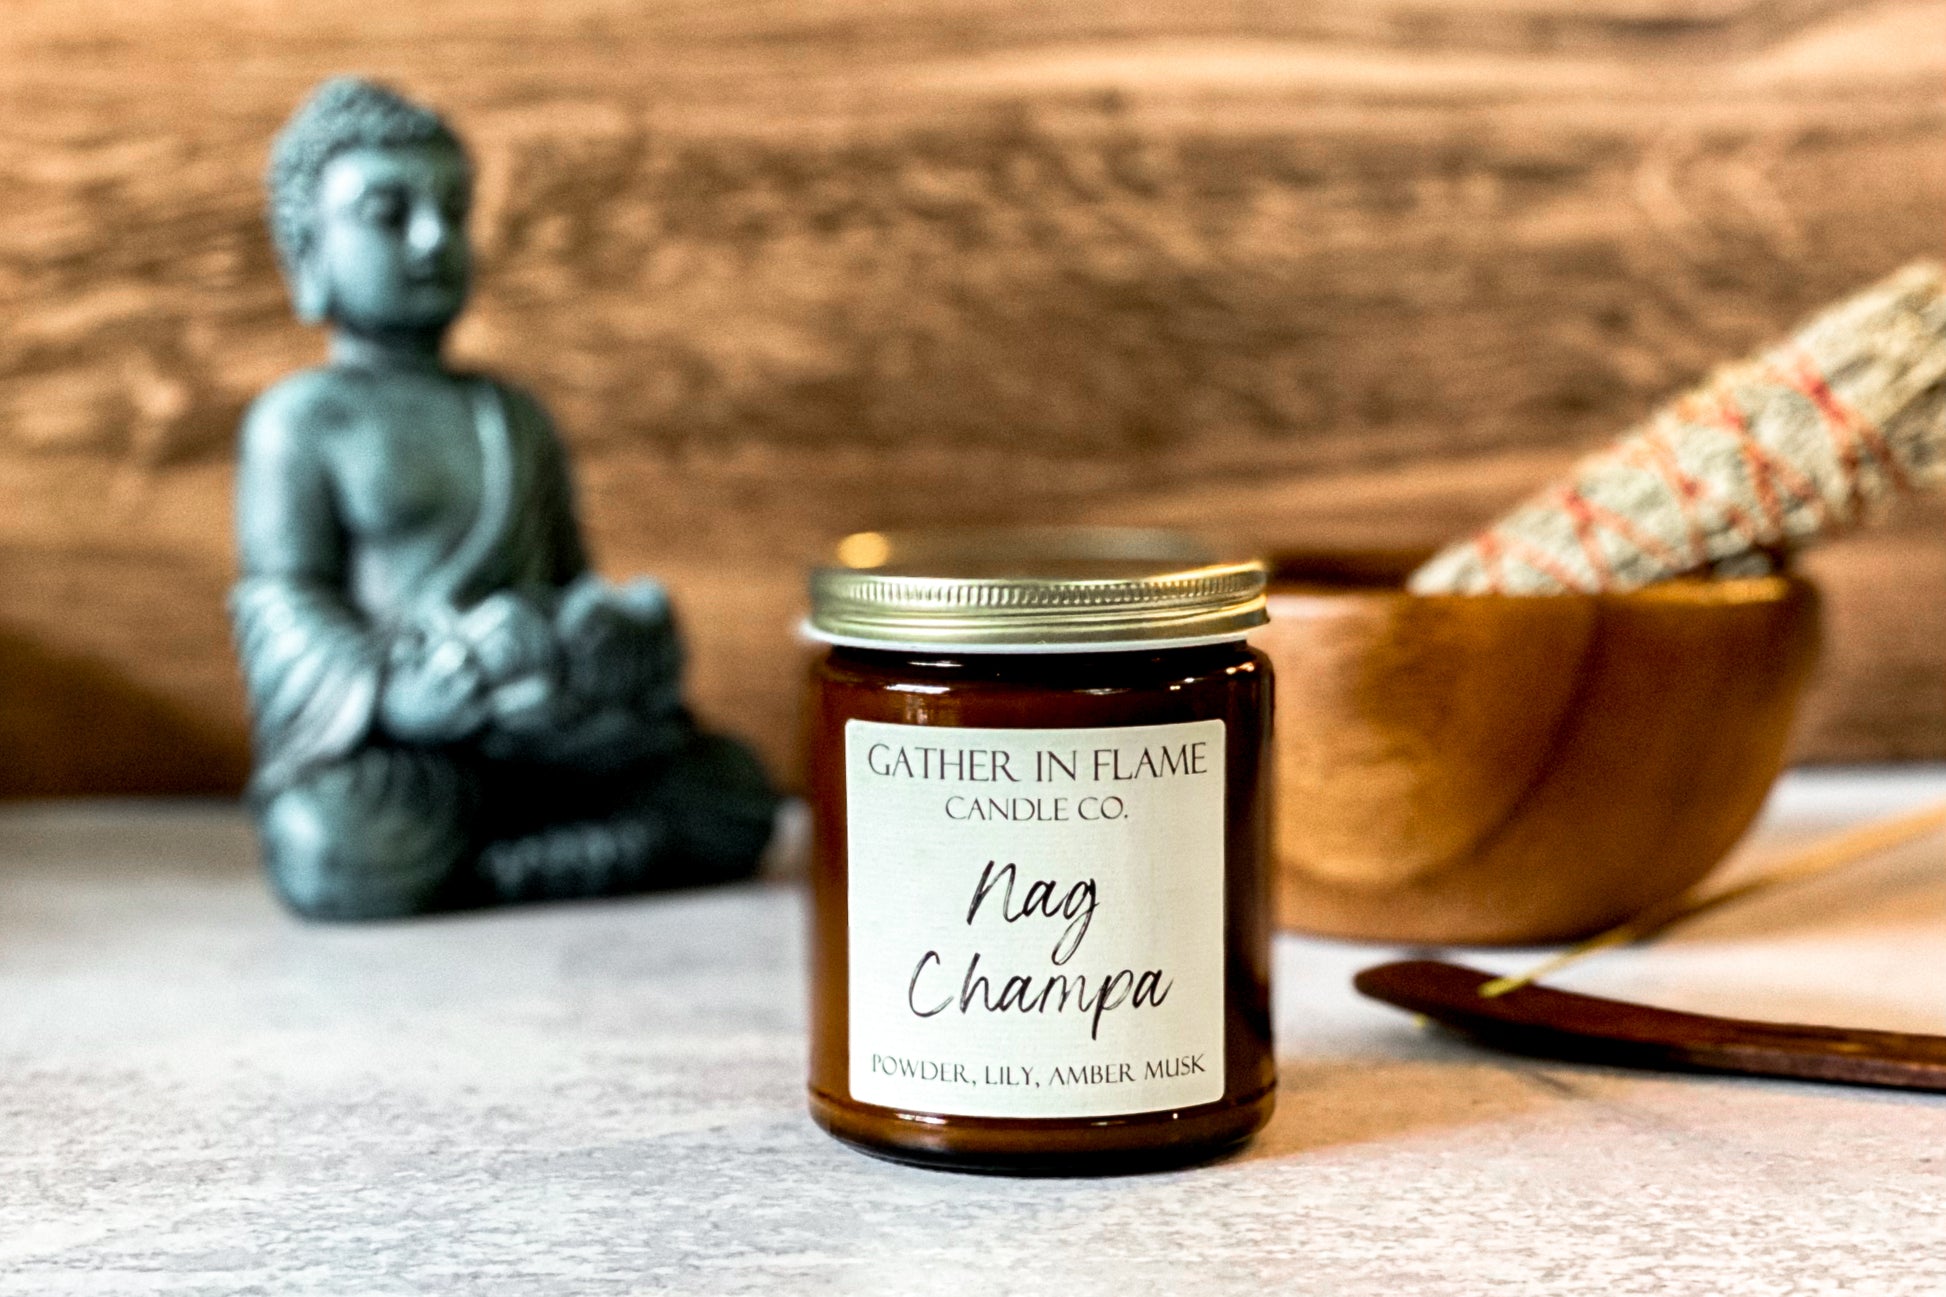 Nag Champa Hand Poured Soy Wood Wick Candle // Incense // Vegan  //meditation Candle // Yoga Candle 